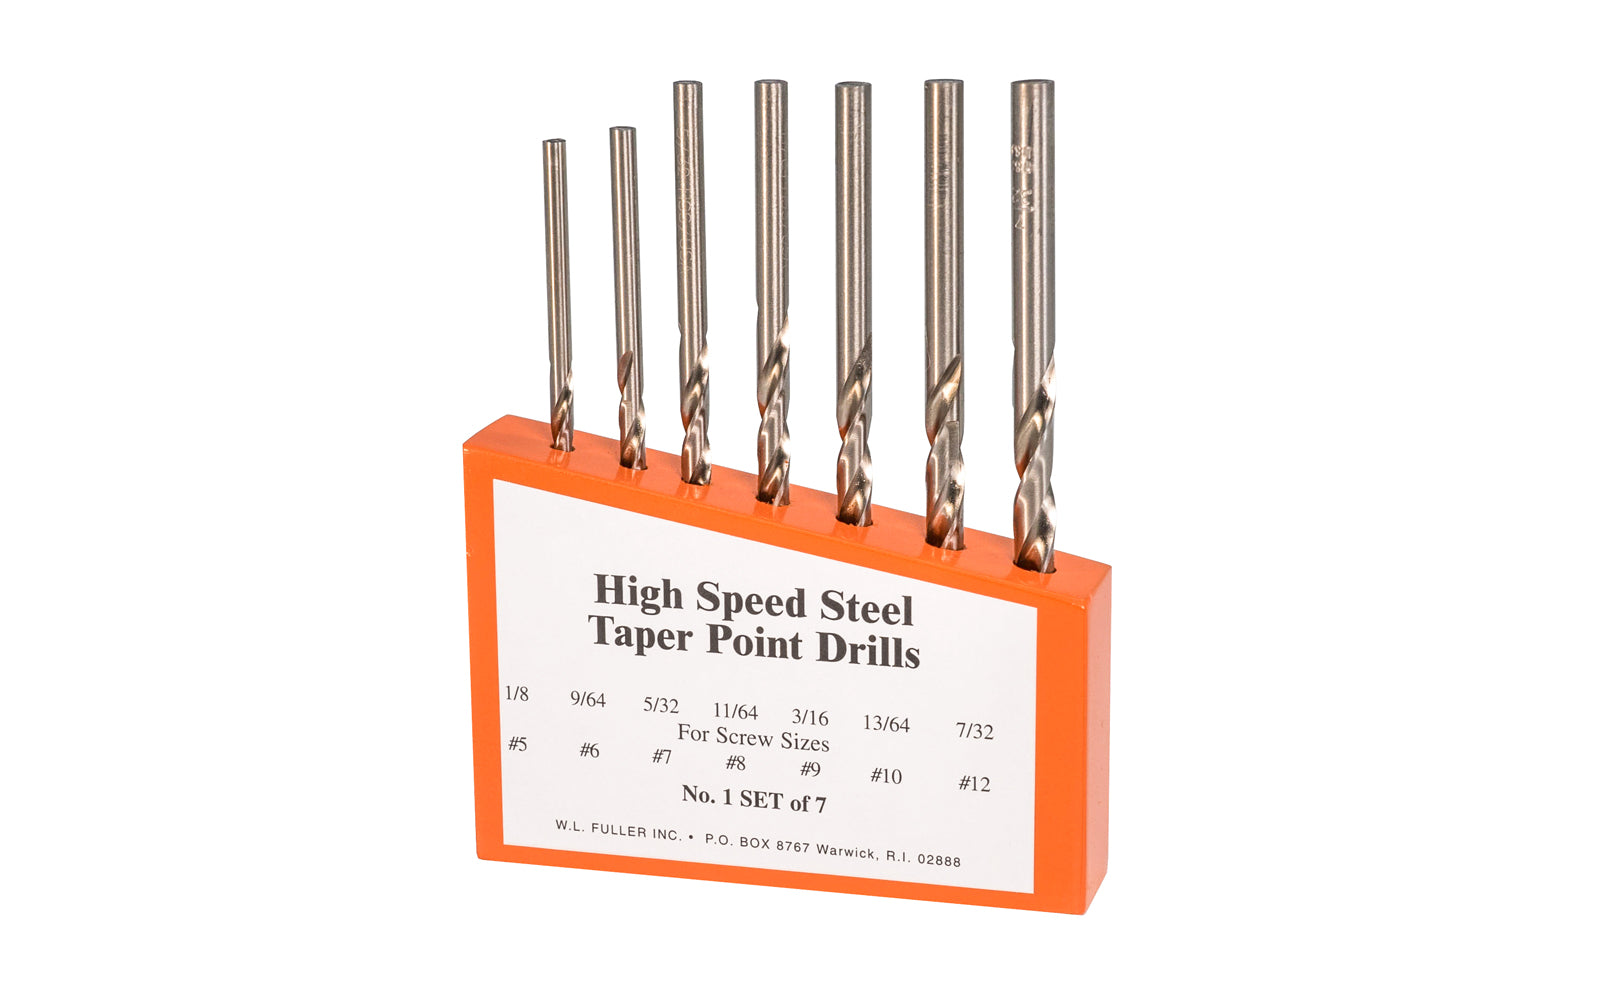 Made in USA · 7-piece HSS taper point bit set - WL Fuller Drill Bit Set - Model No. 20190501 - Includes wood block holder - High speed steel ~ Includes size 1/8", 9/64", 5/32", 11/64", 3/16", 13/64", & 7/32" tapered drill bits ~ For hard & softwoods, & plastics ~ Quality American-made drill bit. 807200051357. No. 1 Set